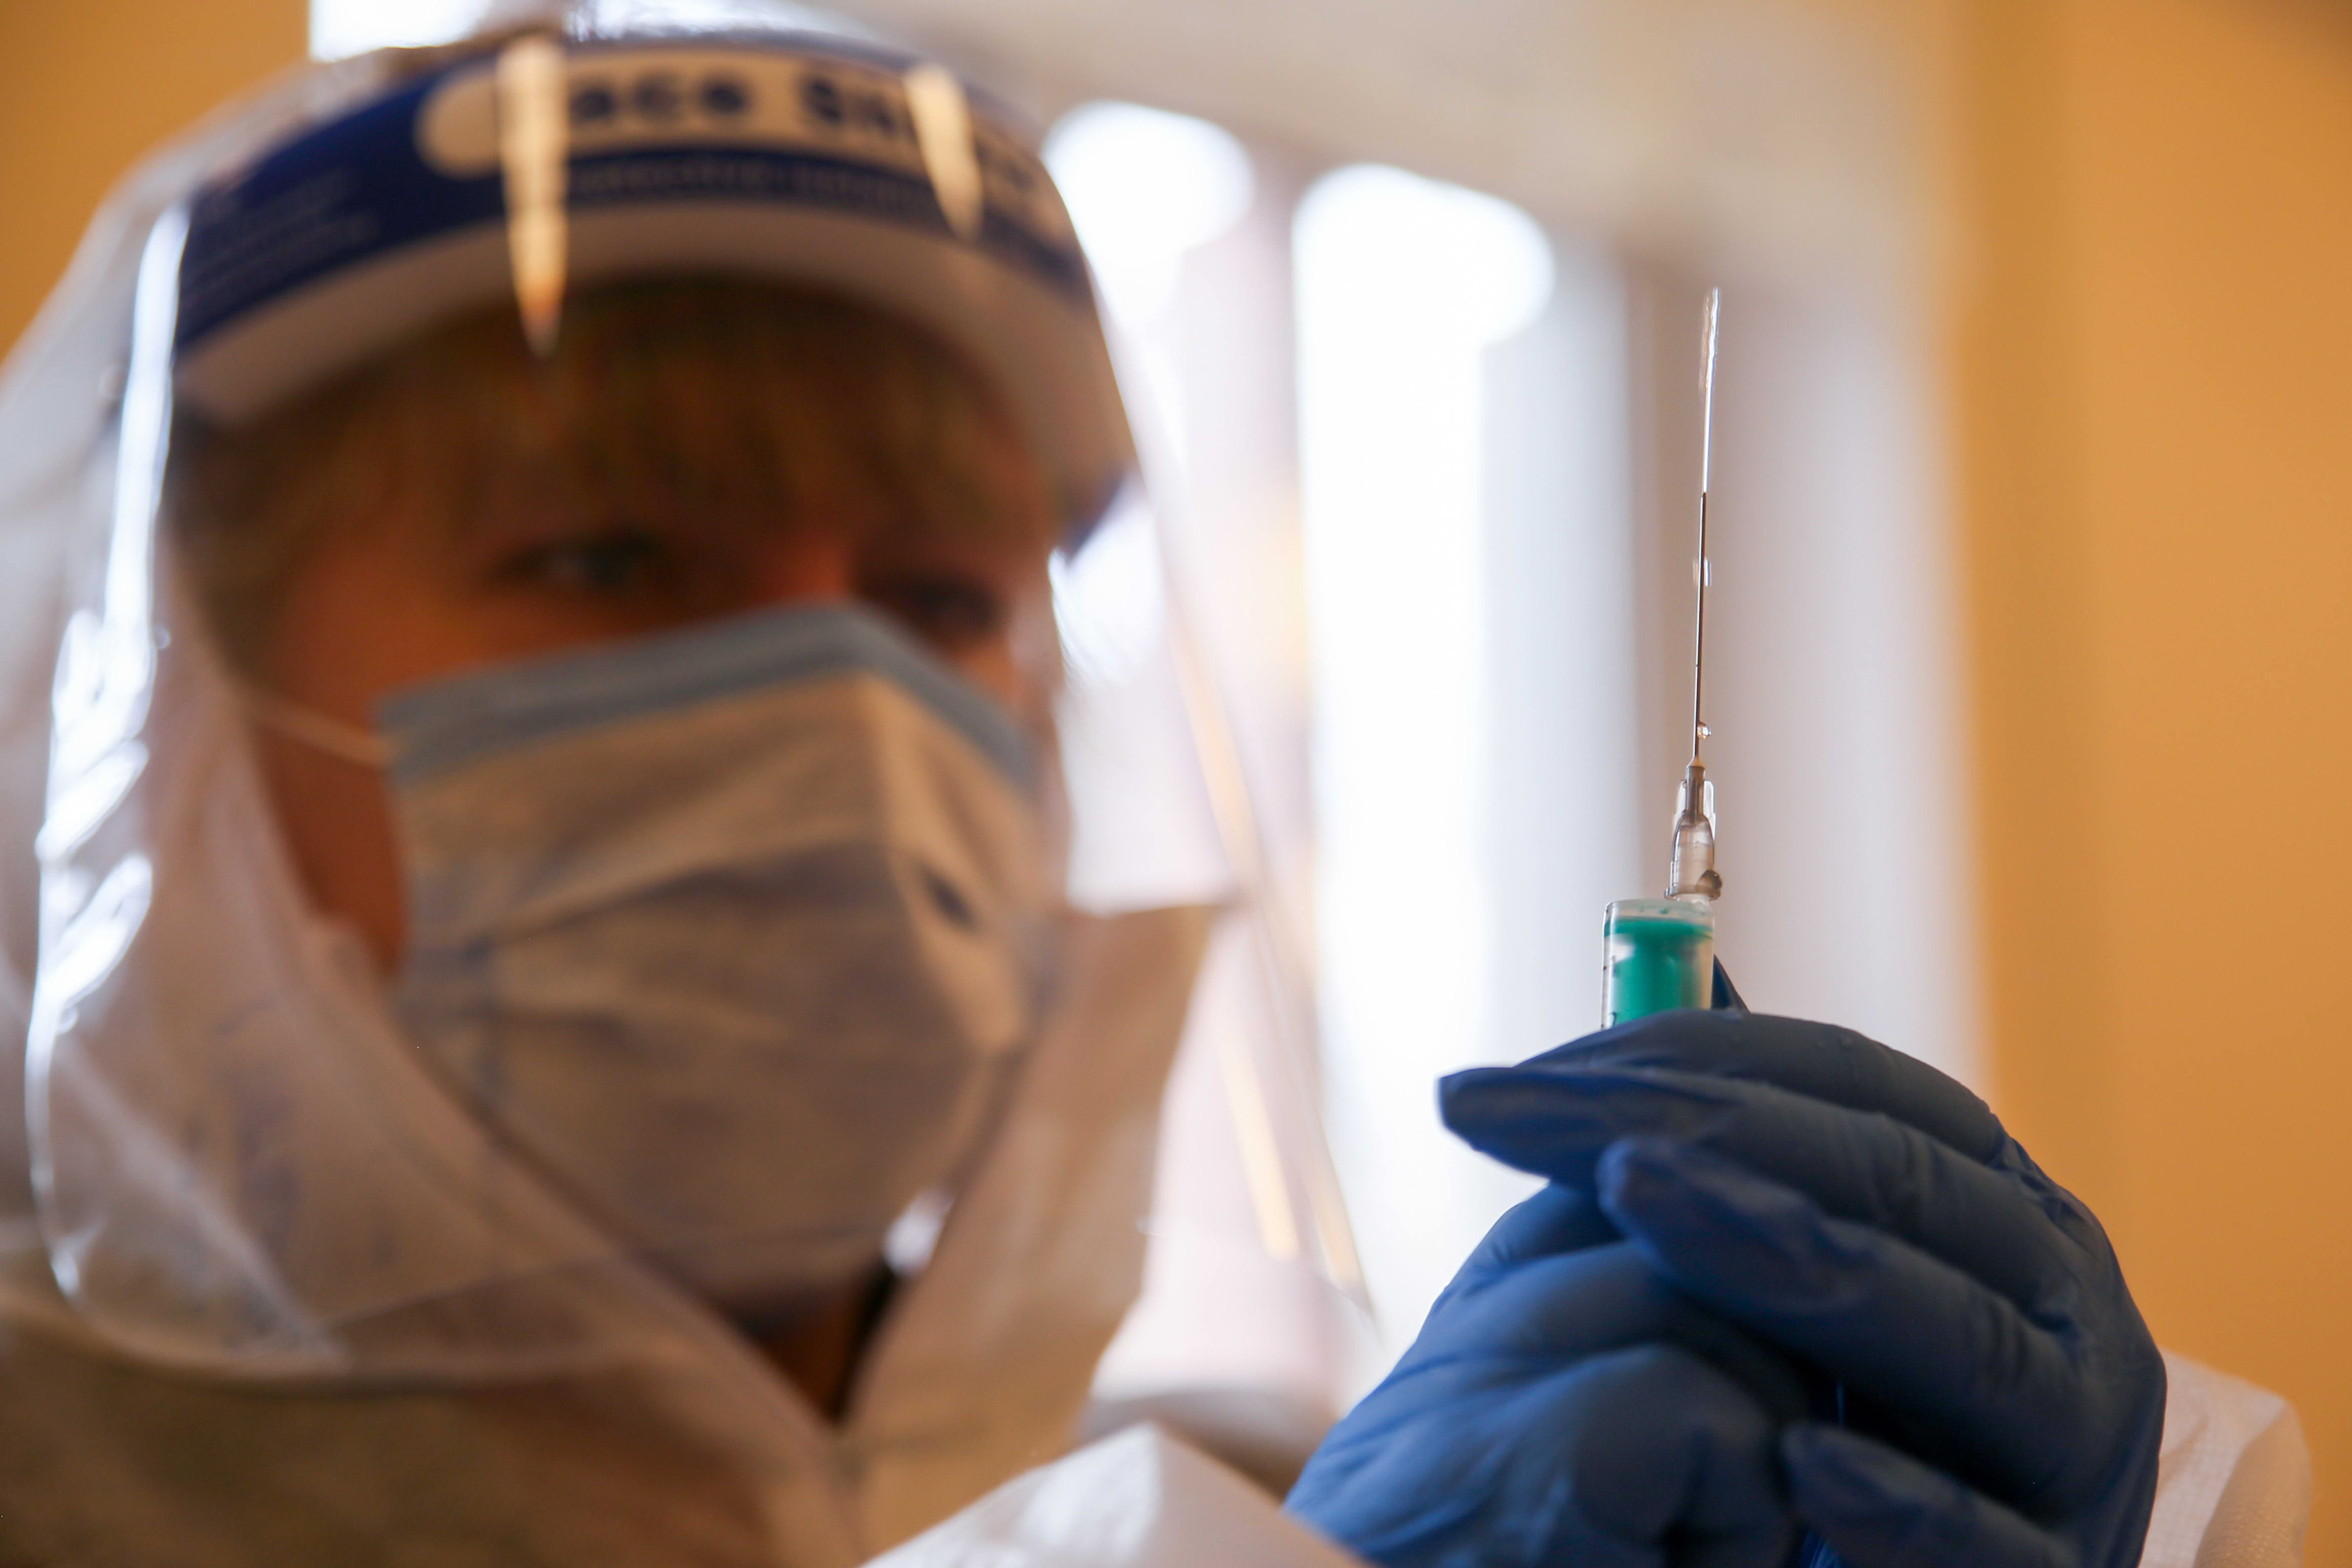 Europe should get the Sputnik vaccine amid the “Pfizer monopoly”: RDIF